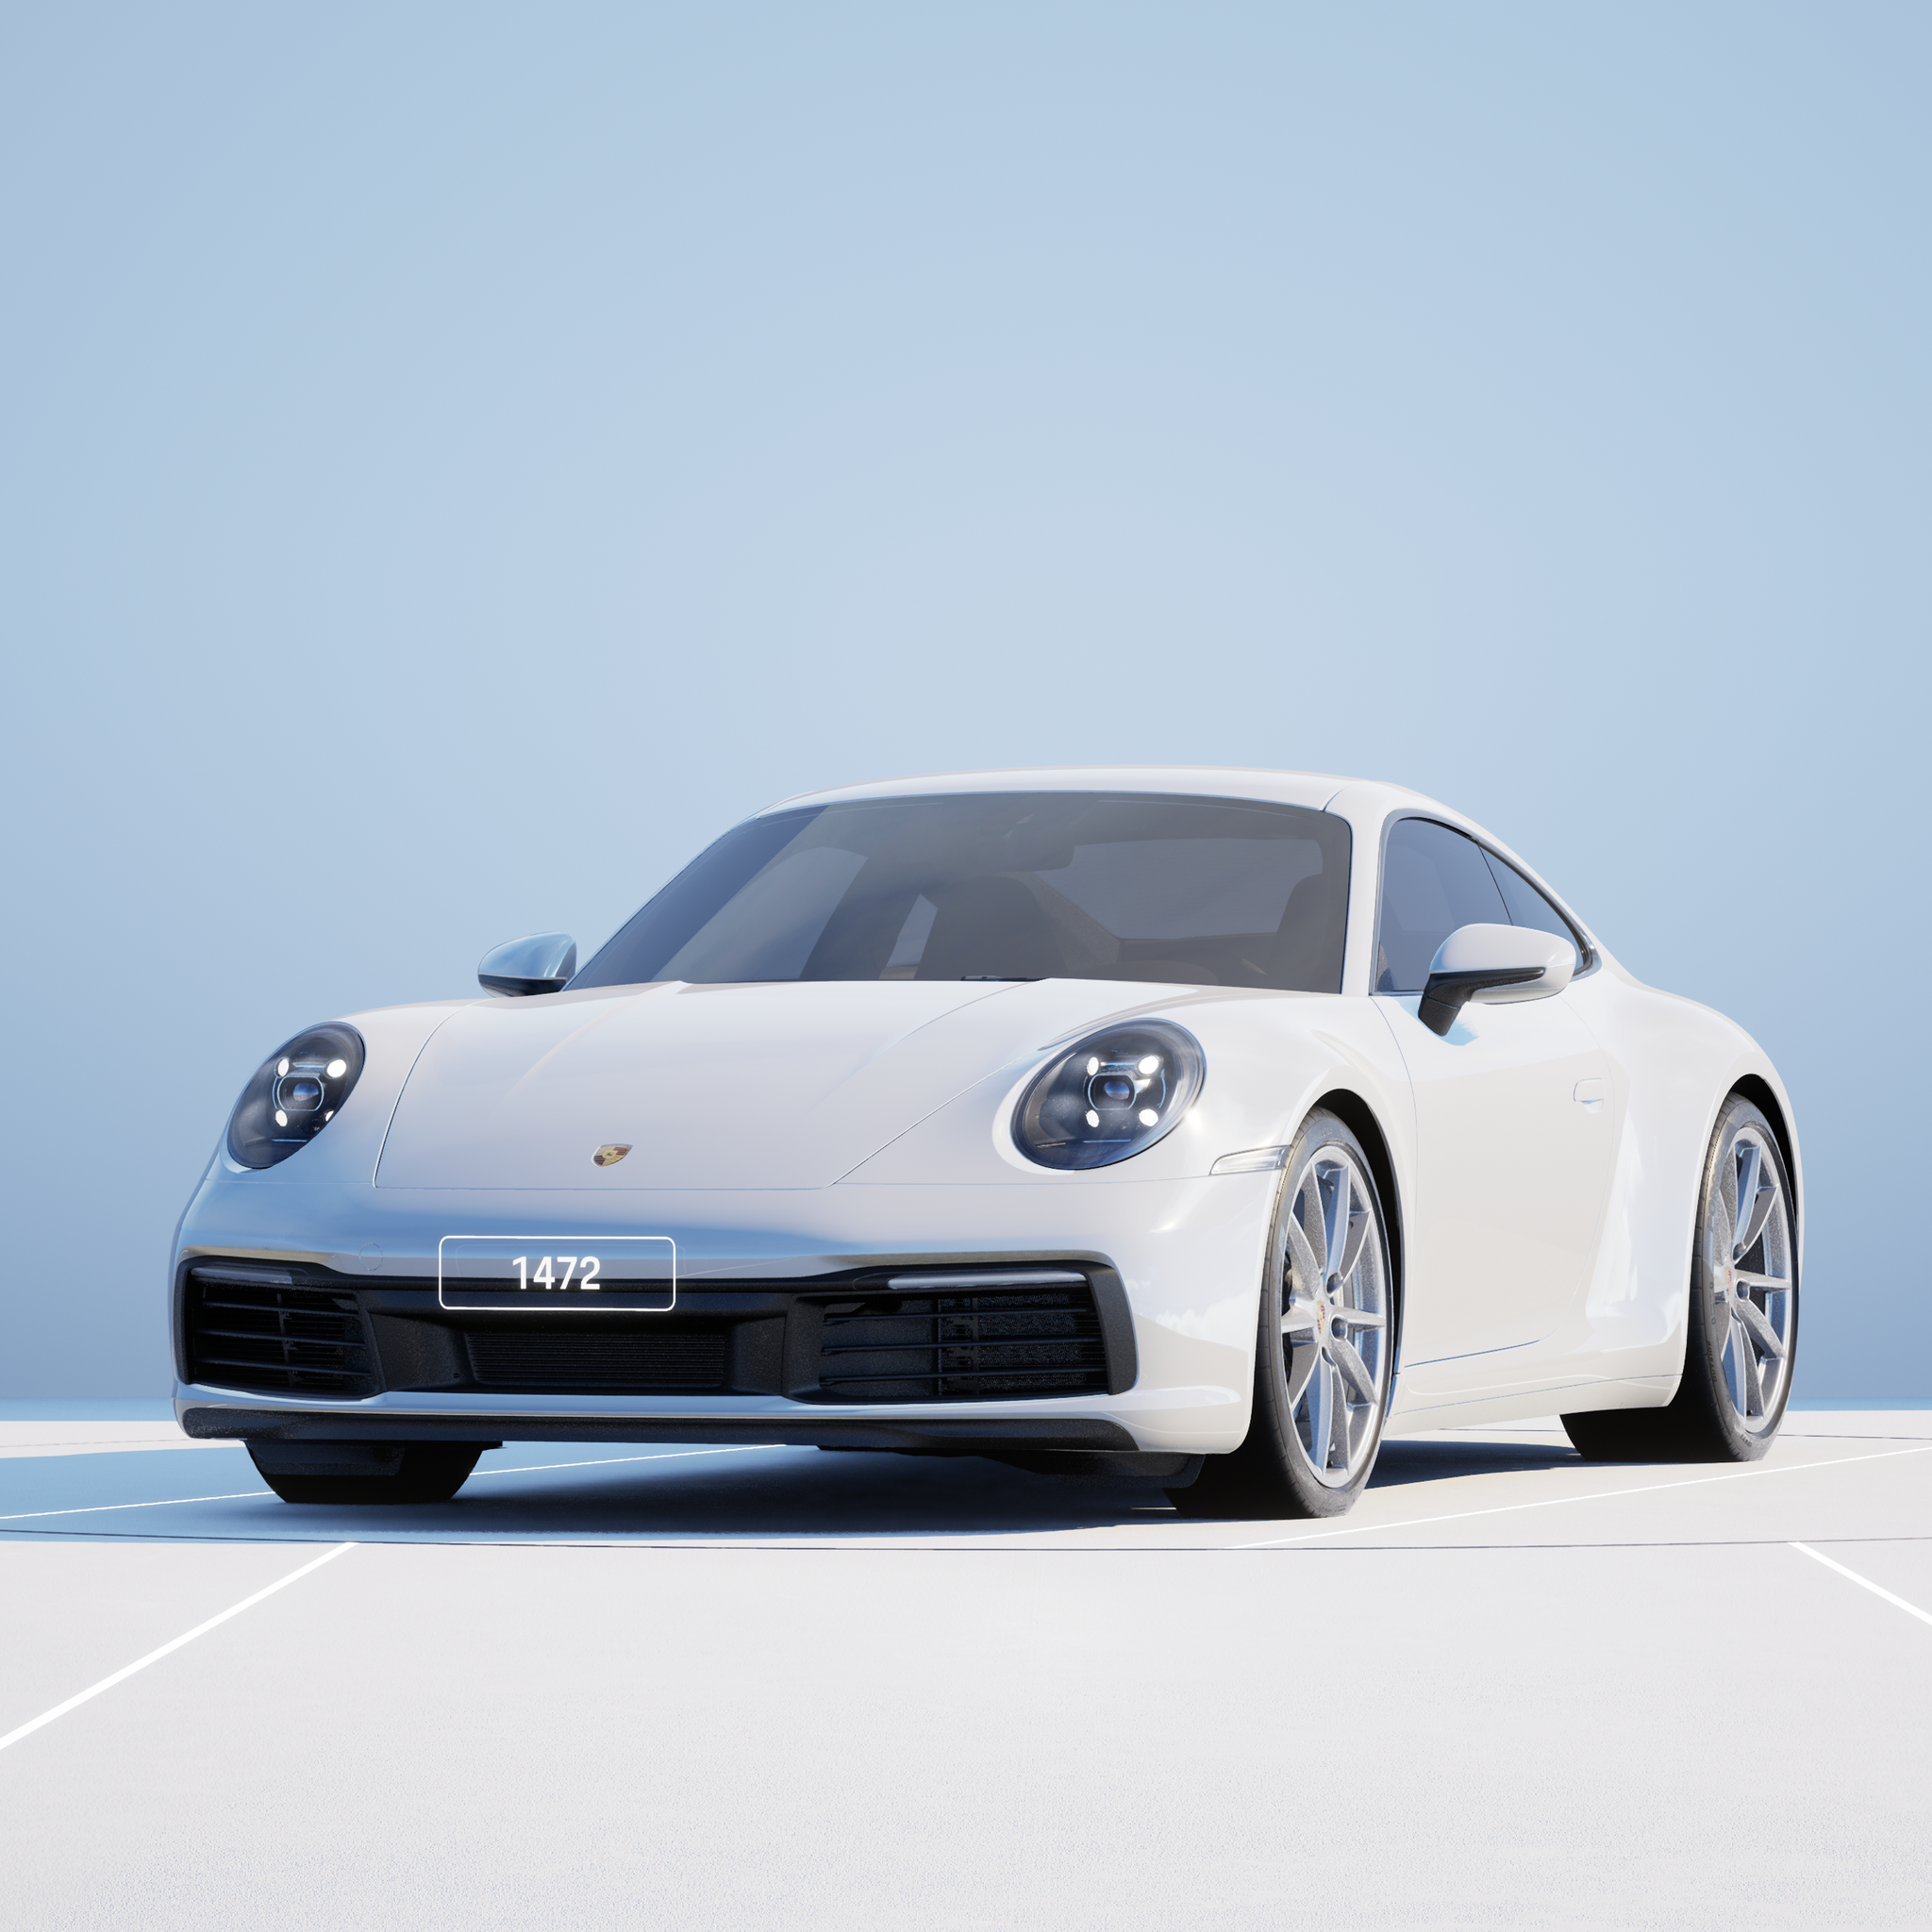 The PORSCHΞ 911 1472 image in phase